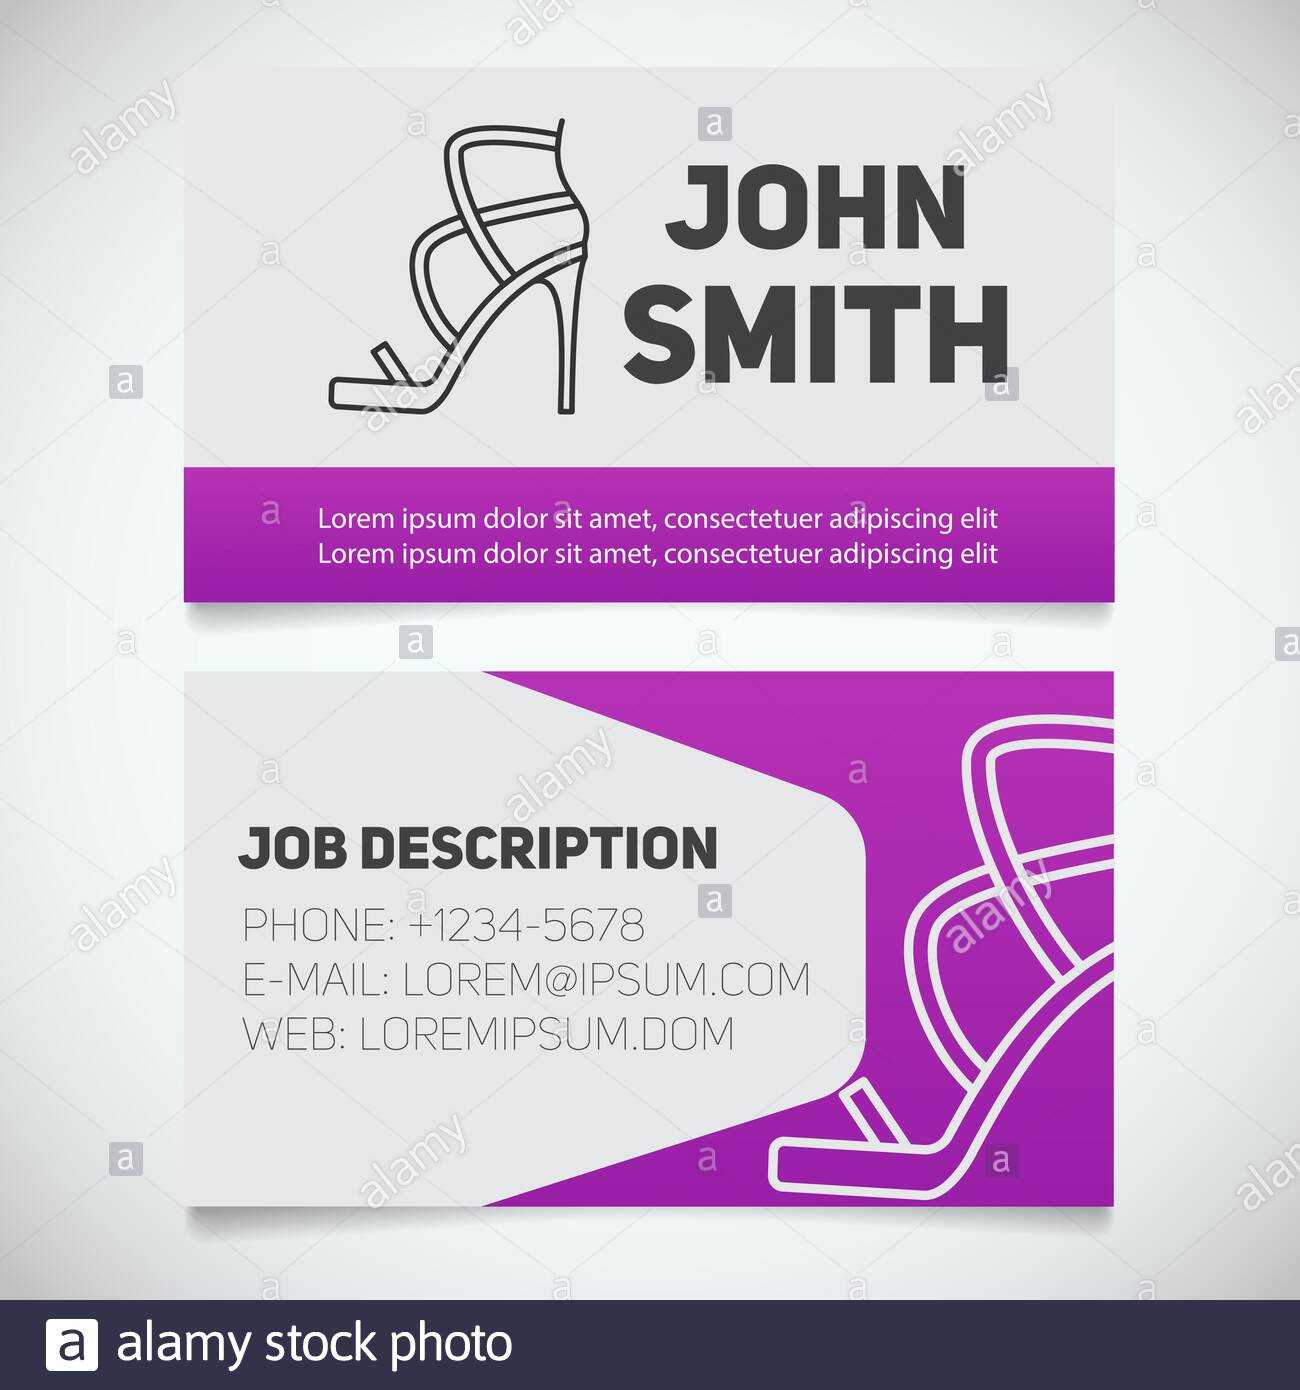 Business Card Print Template With High Heel Shoe Logo Throughout High Heel Shoe Template For Card